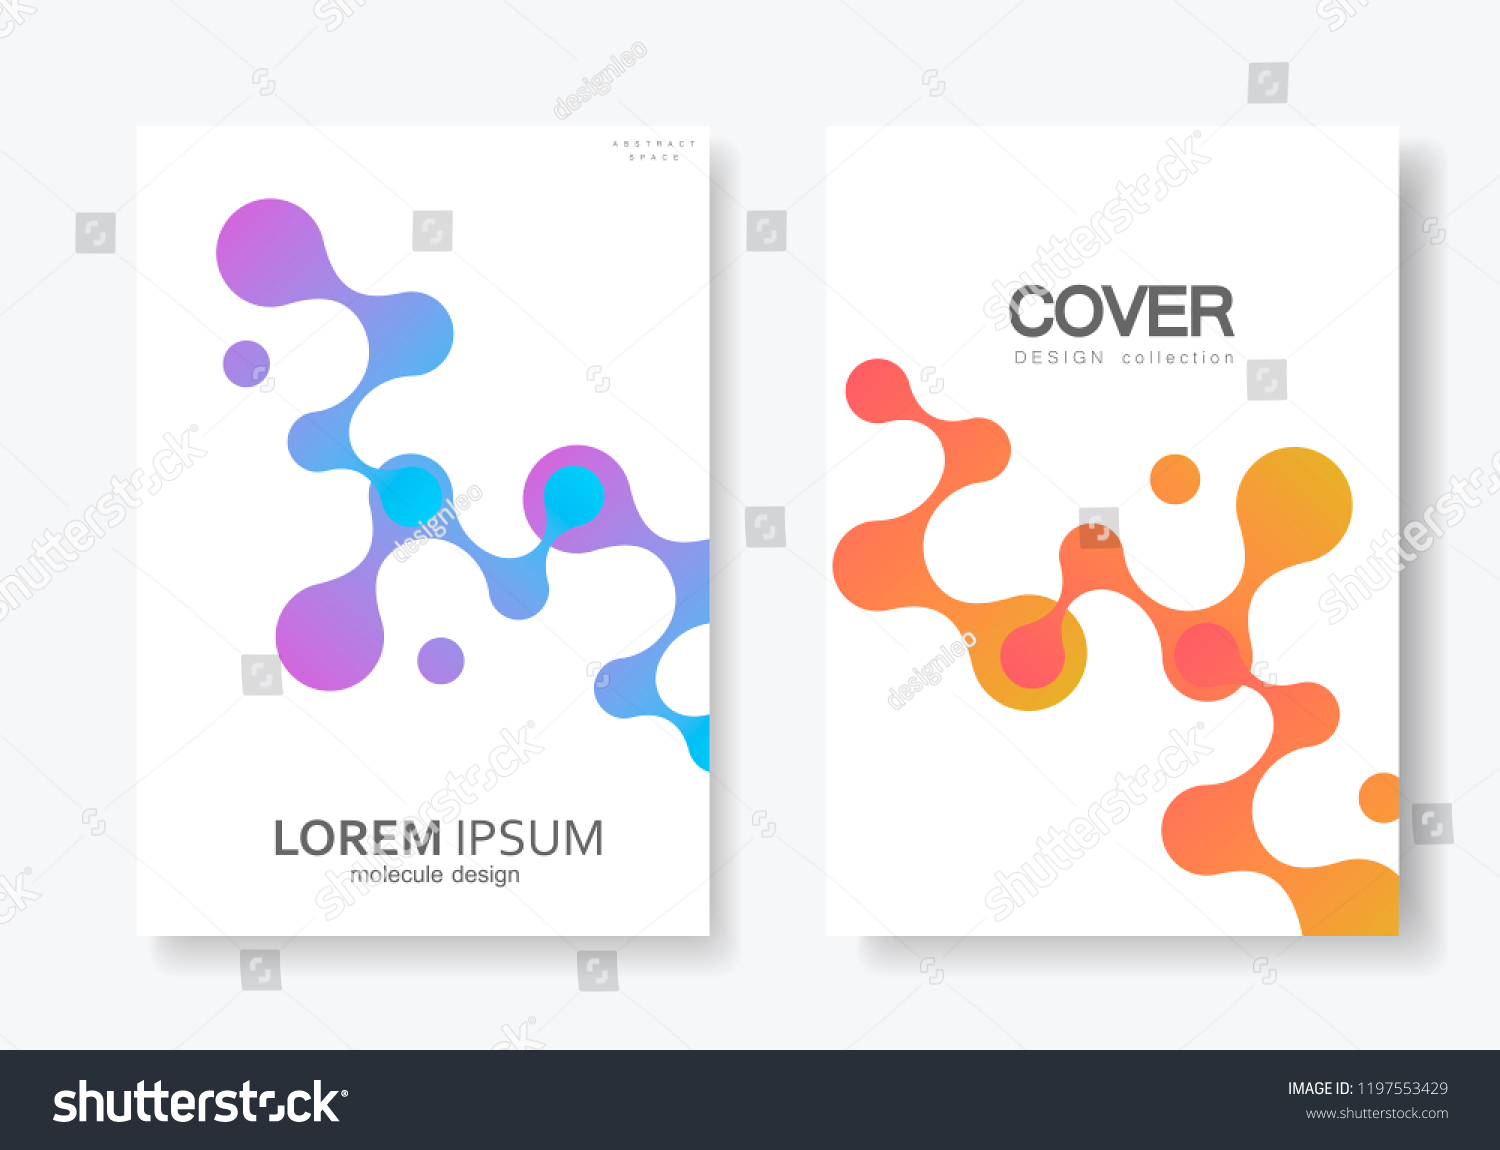 Abstract brochure design with geometric connect molecule #1197553429